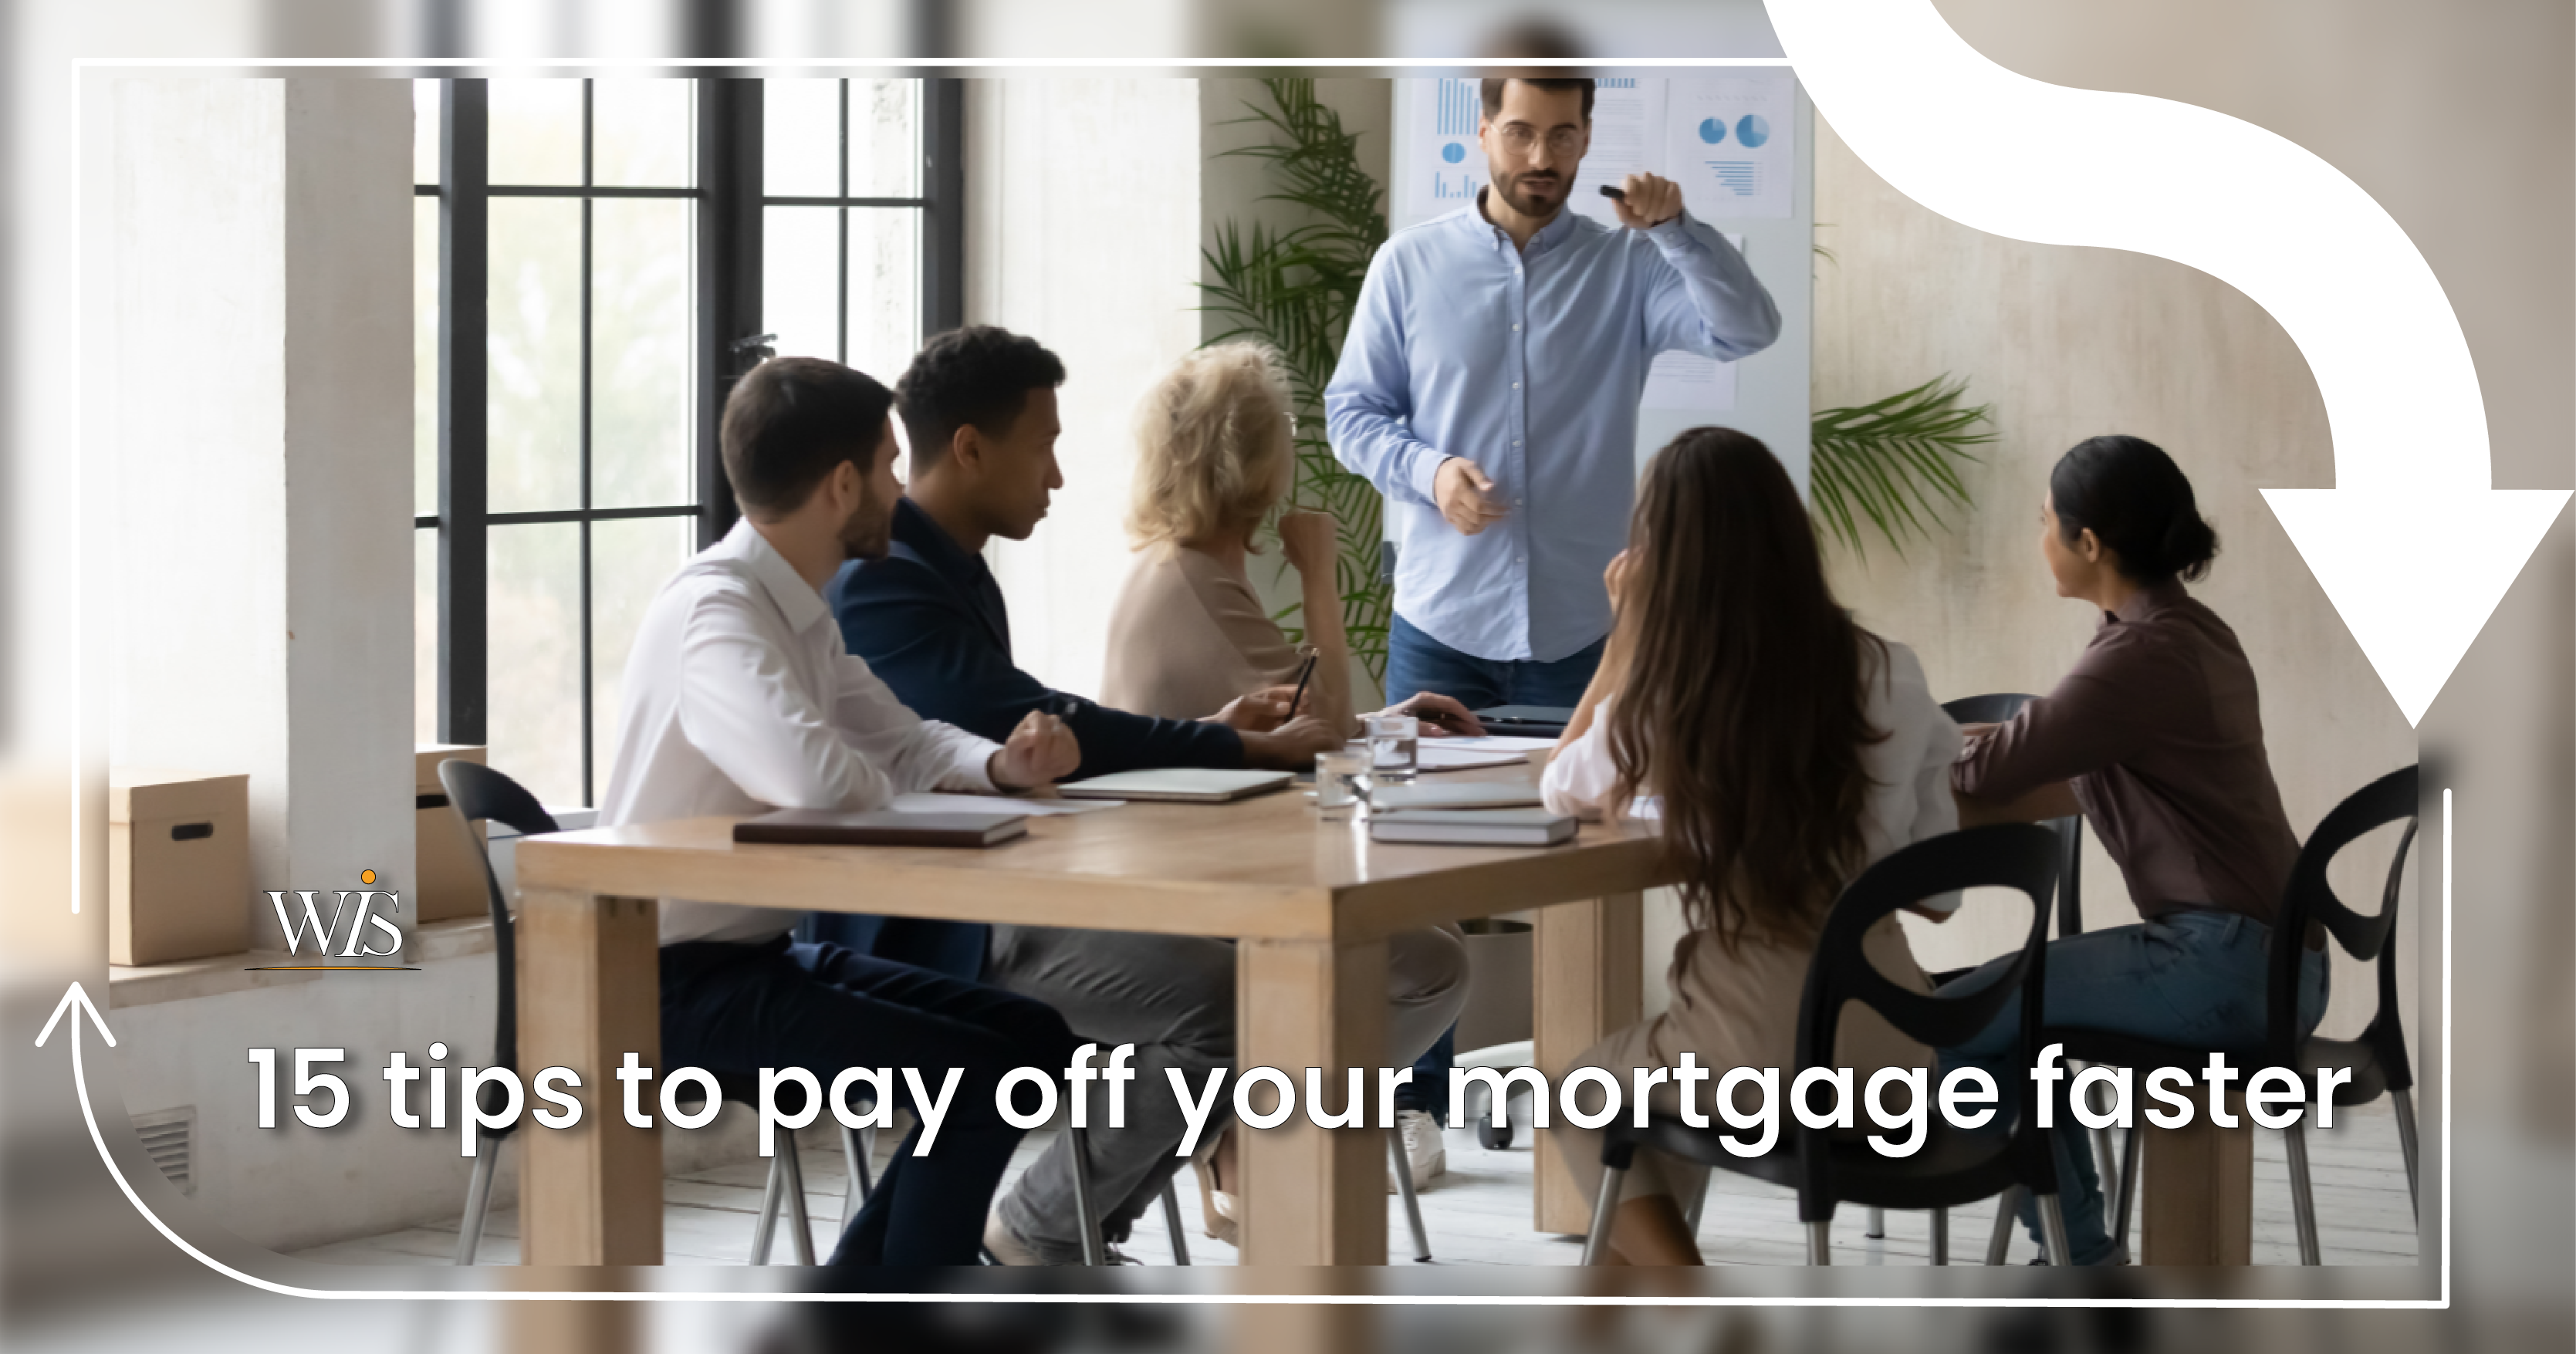 15 tips to pay off your mortgage faster image